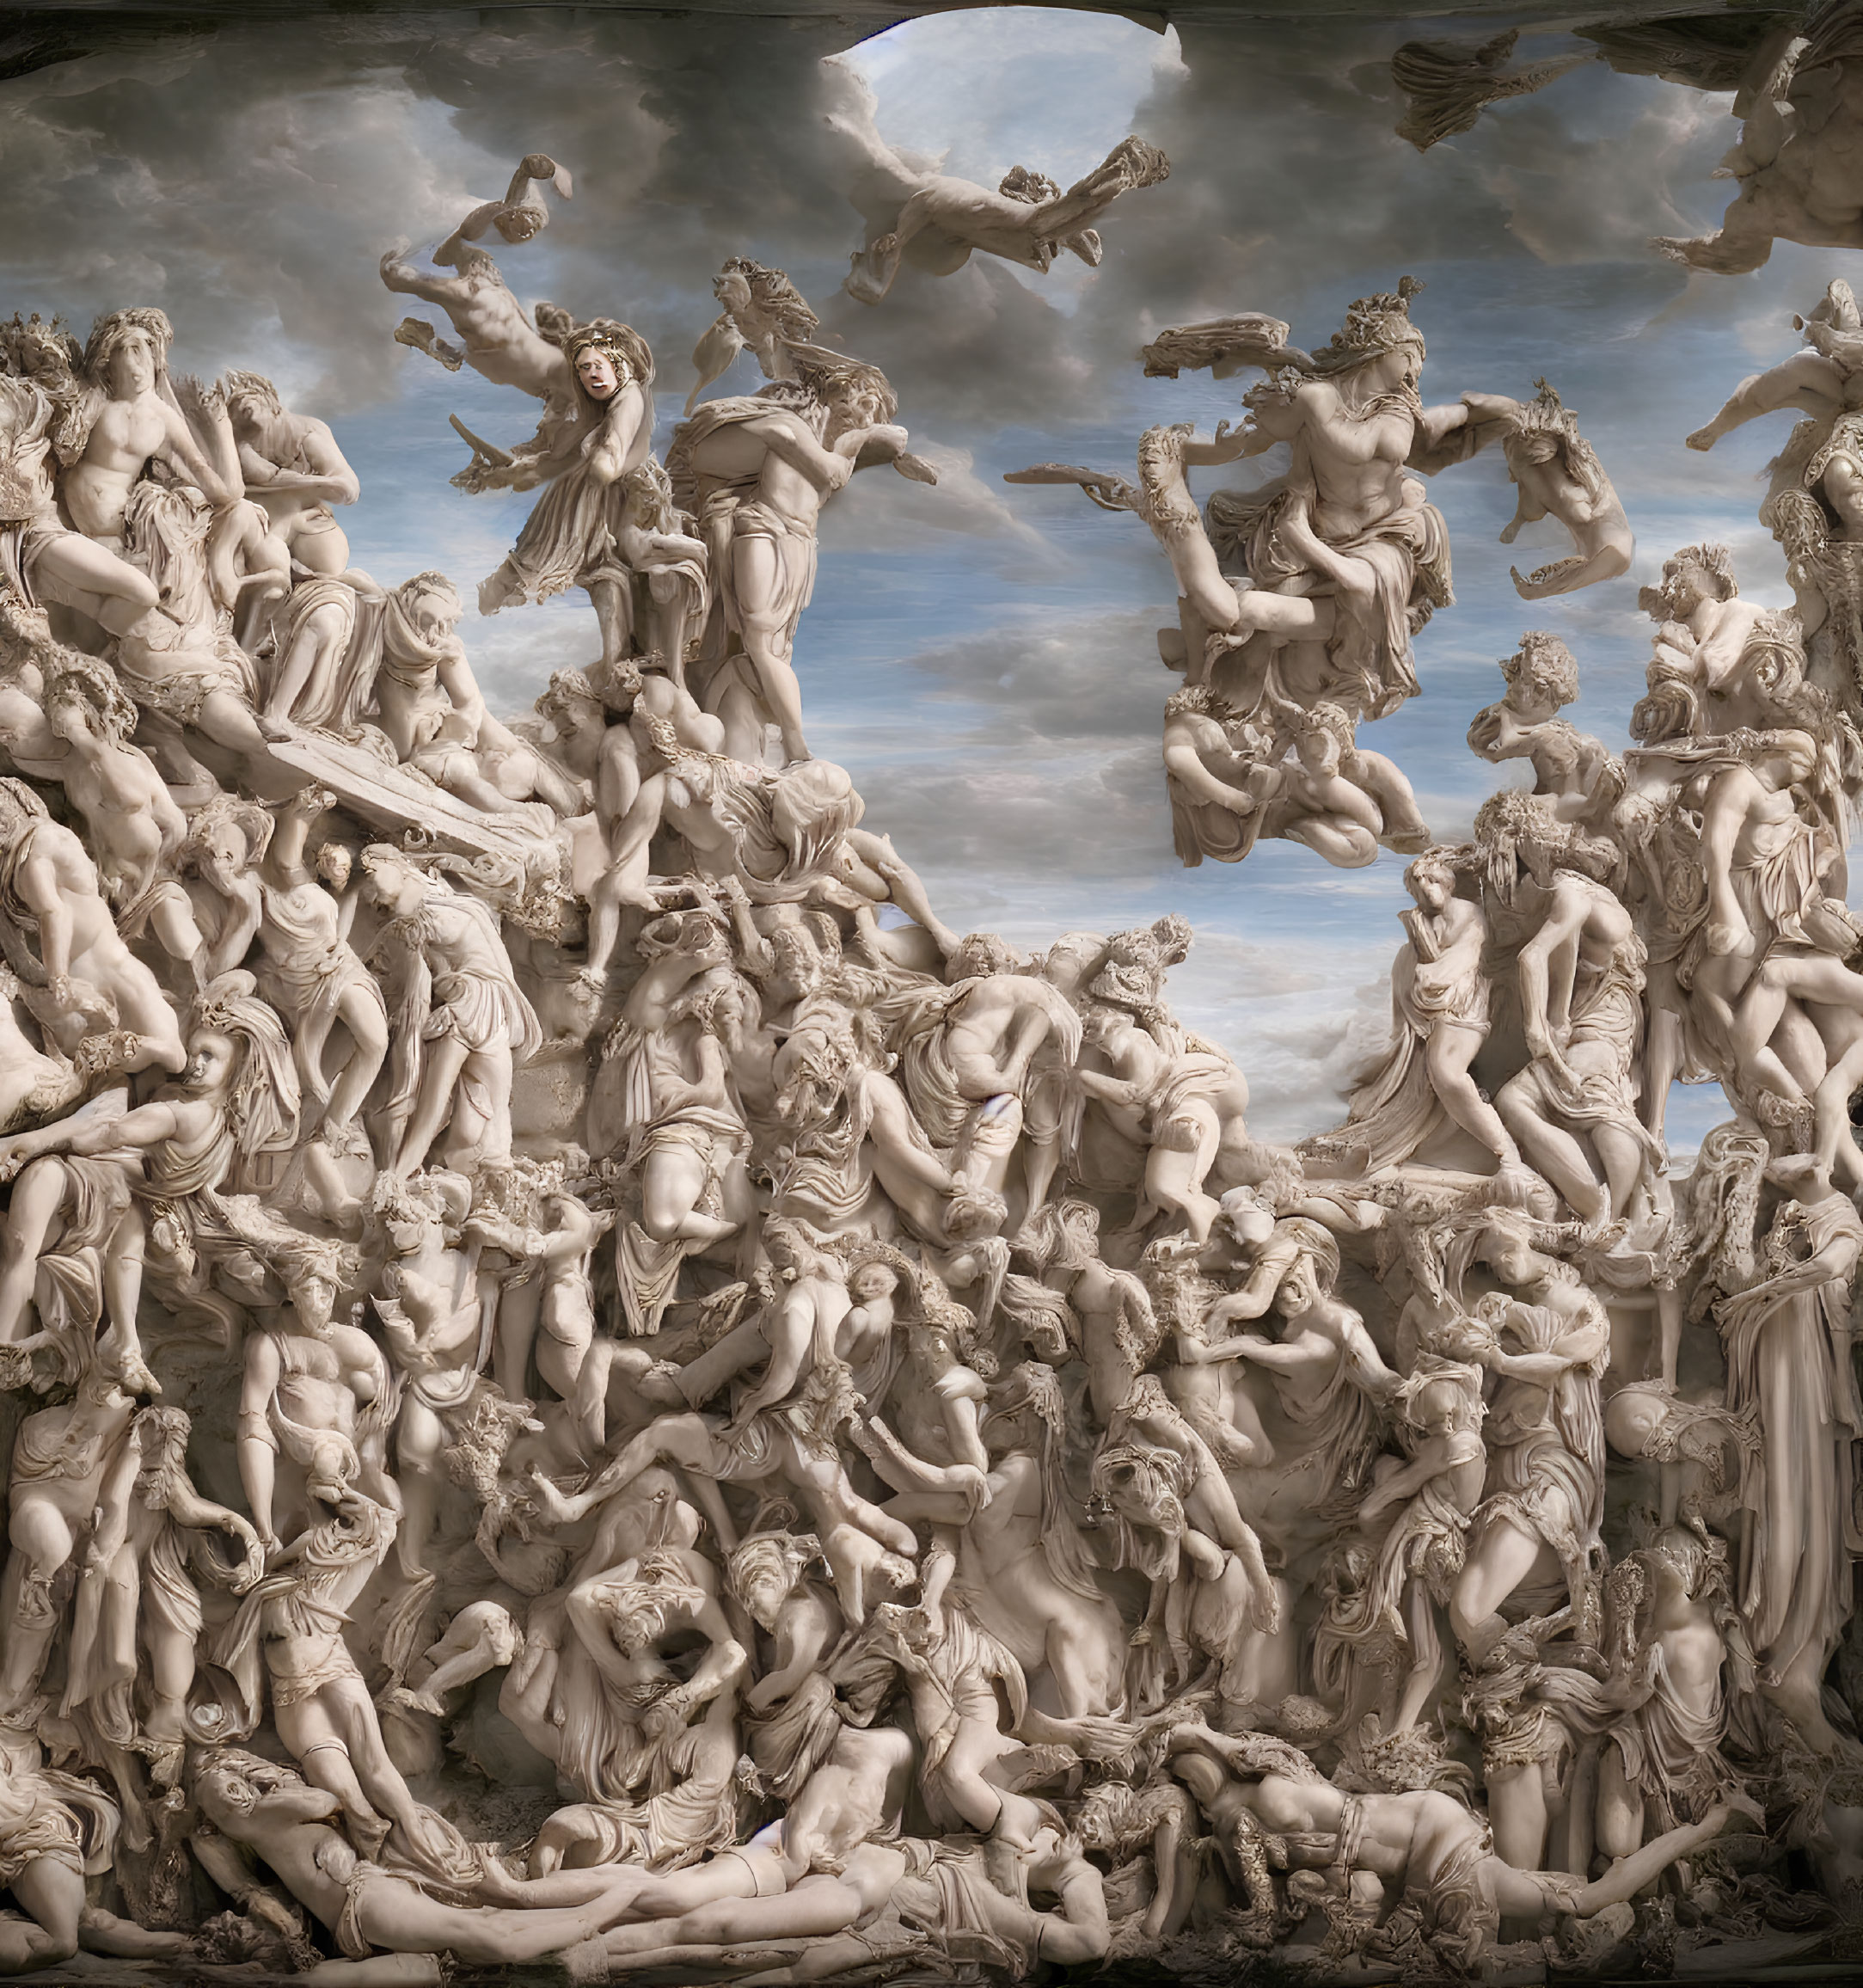 High-relief sculpture of classical mythology figures in dynamic poses against cloudy sky